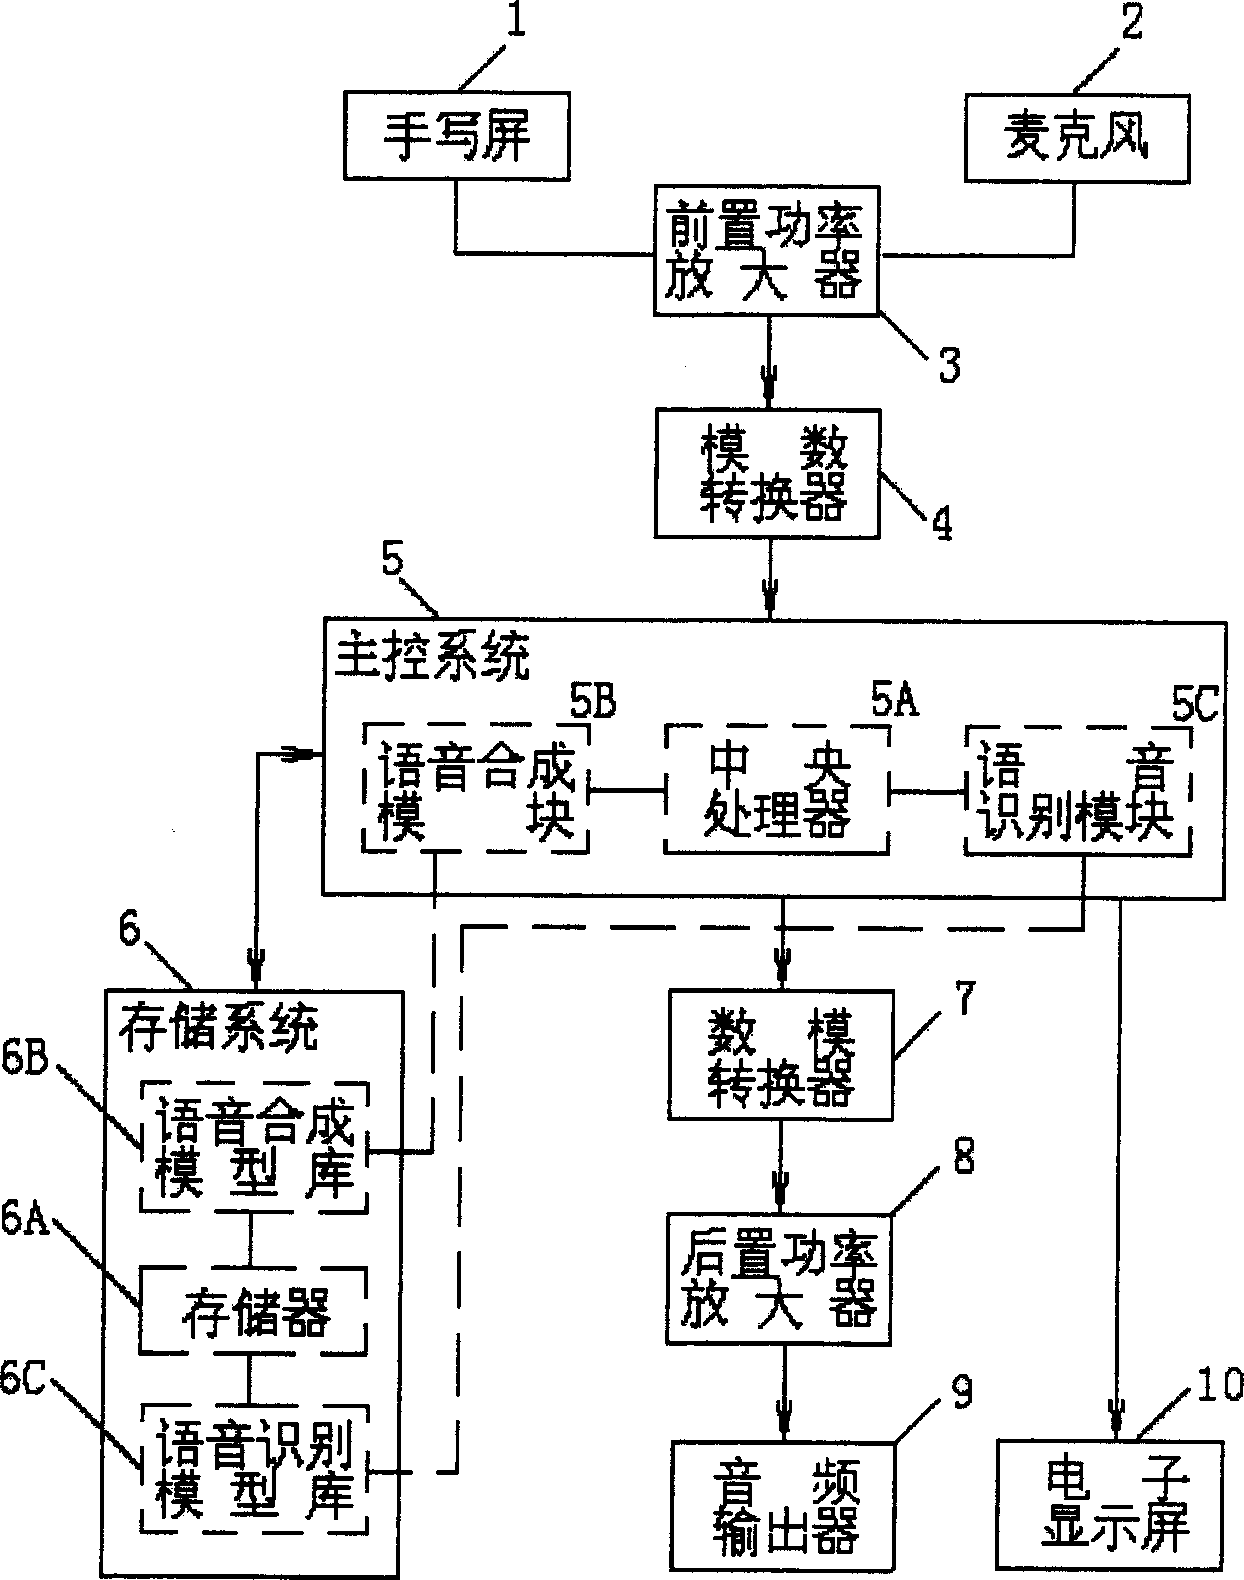 Text-to-speech interchanging device